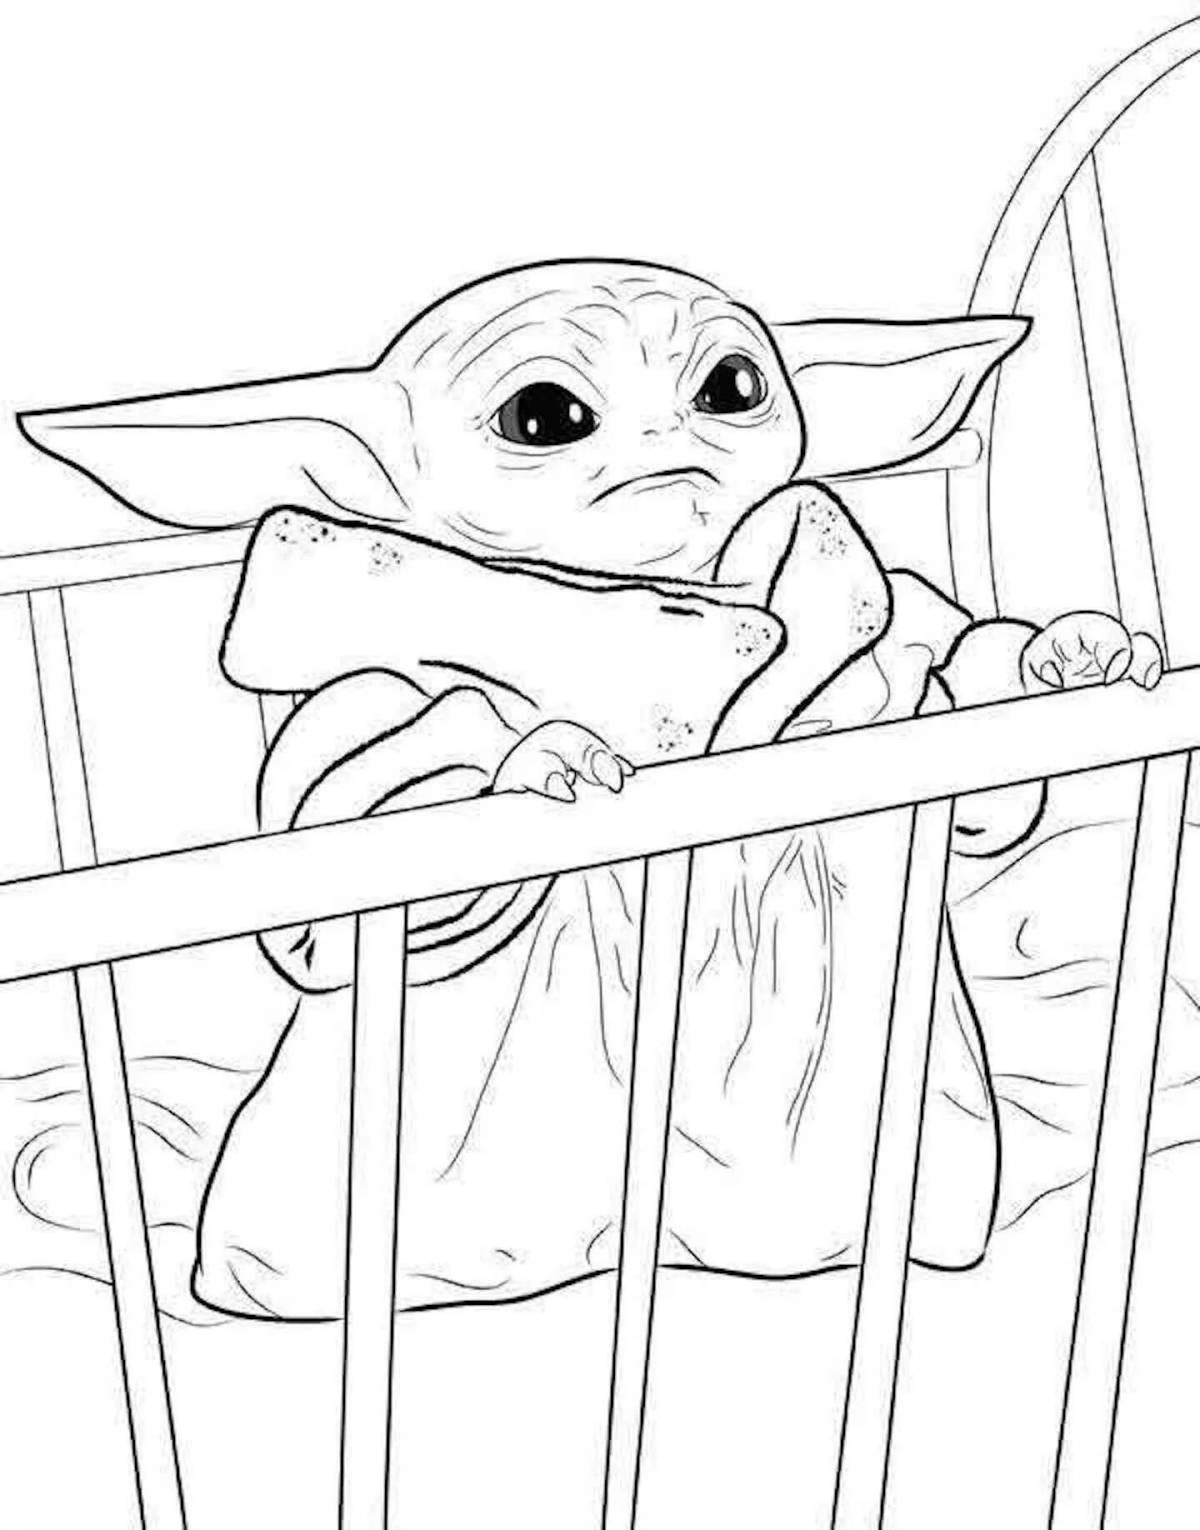 Yoda's brilliantly colored coloring page